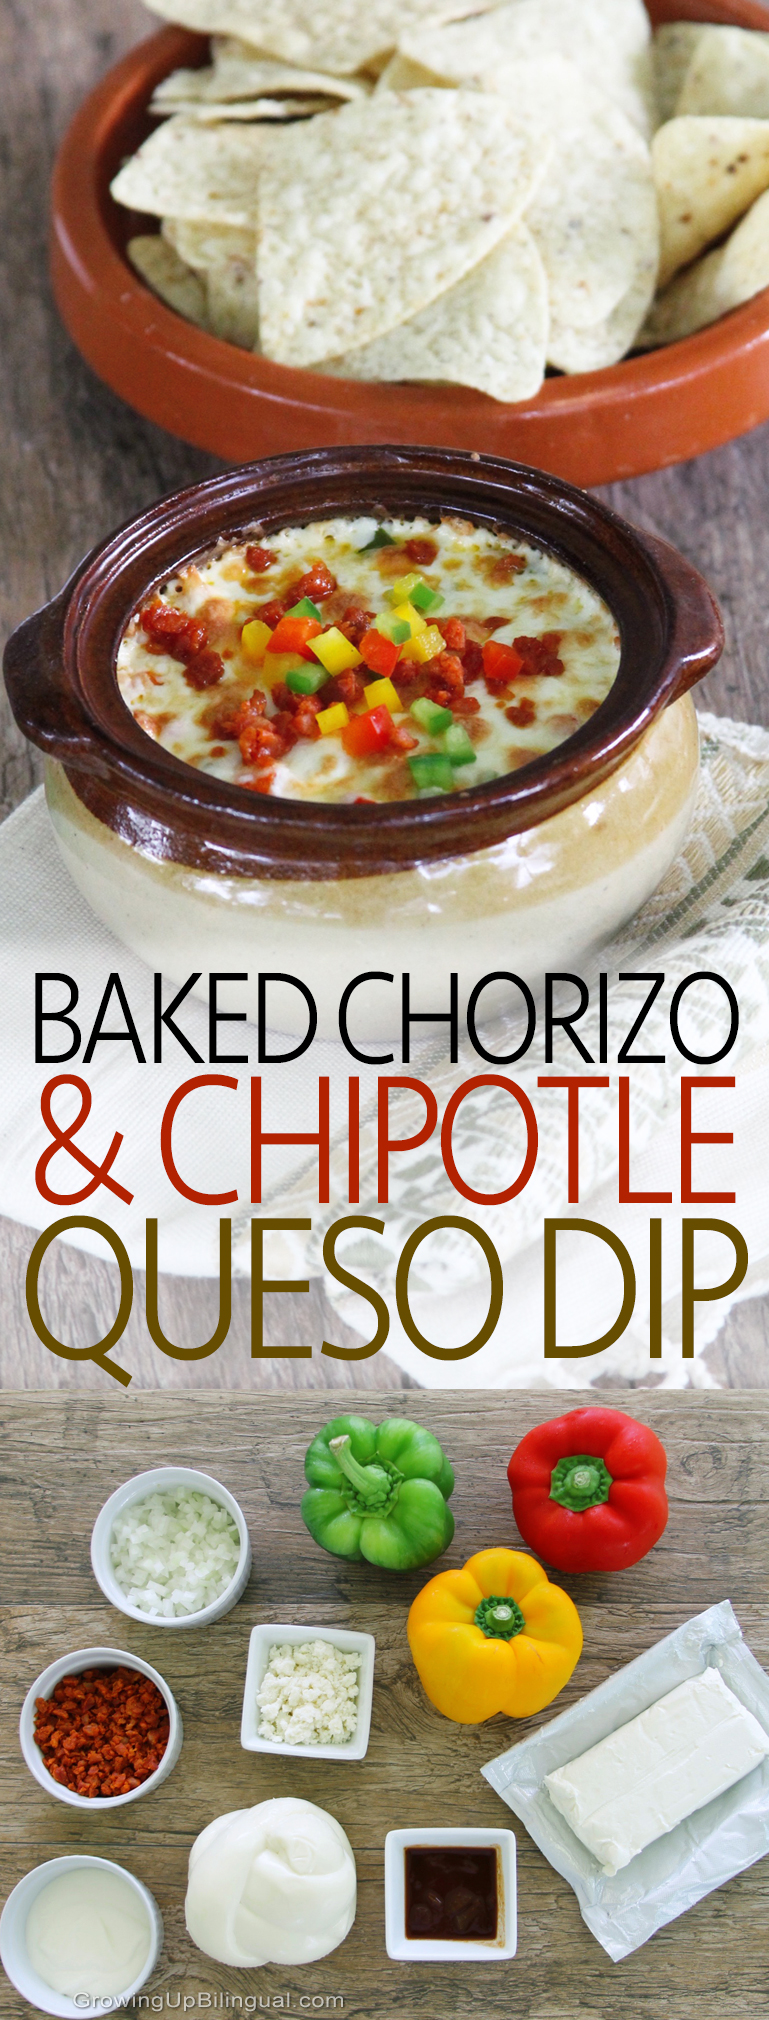 Cheese Dip for pinterest